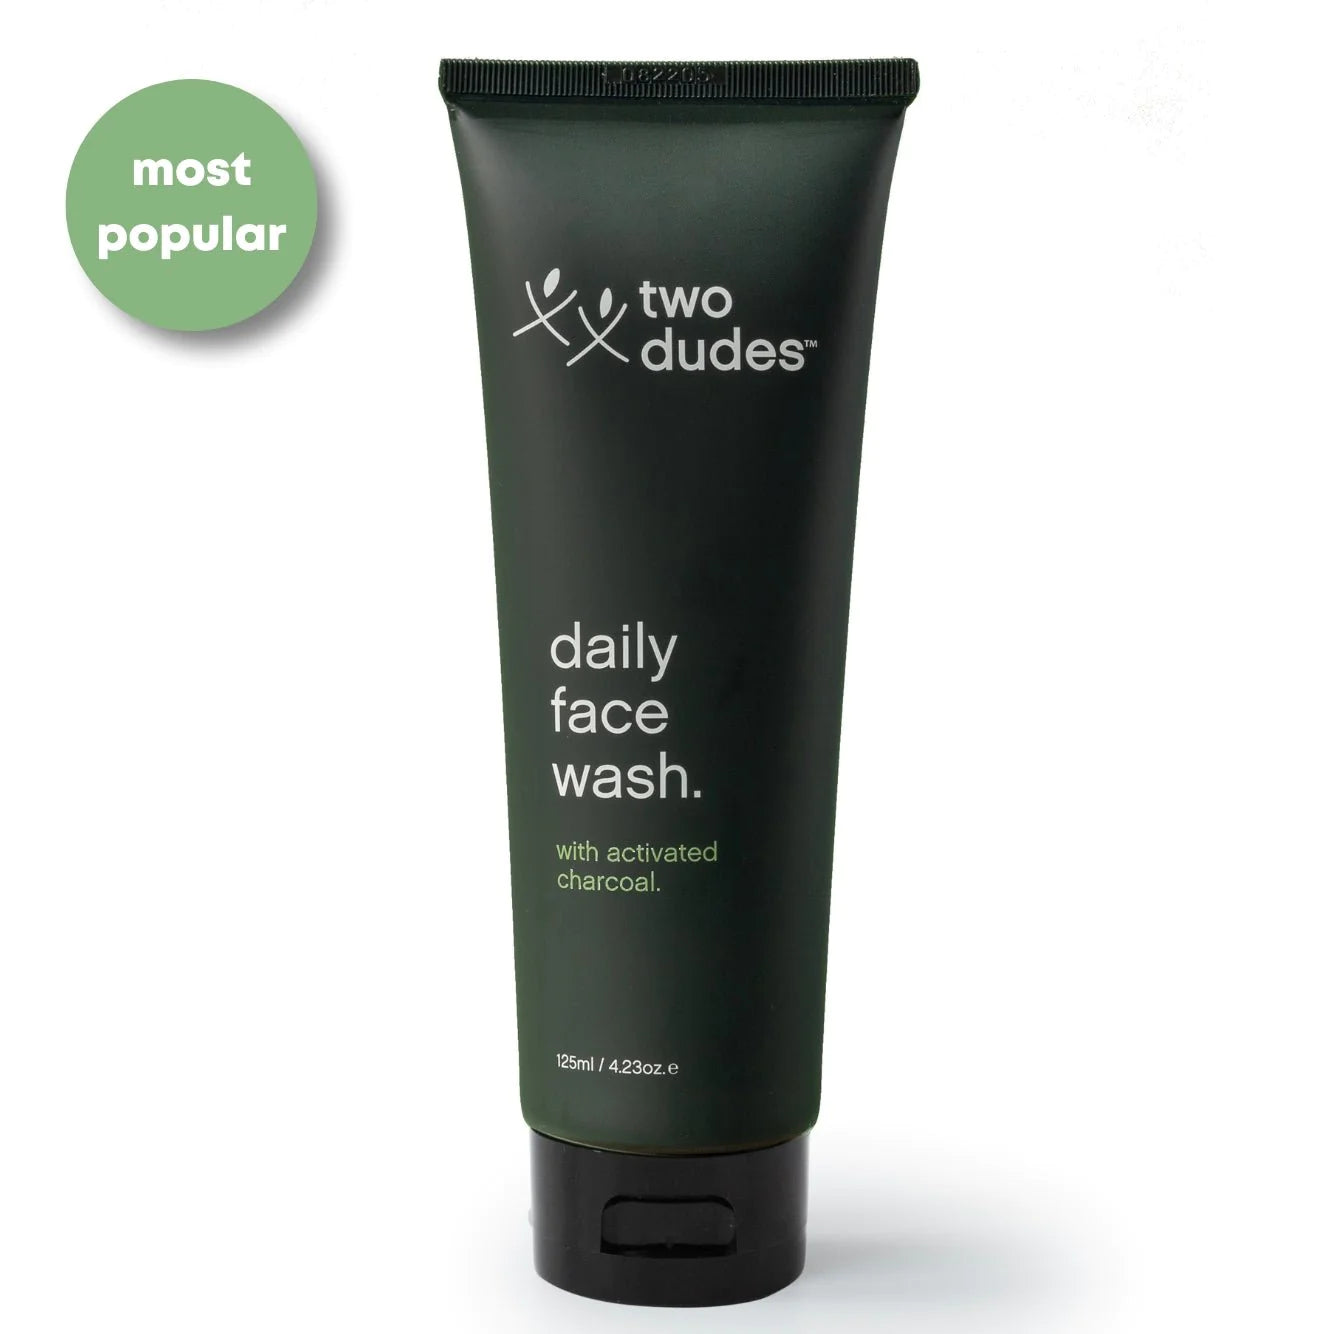 Two dudes daily face wash 125ml